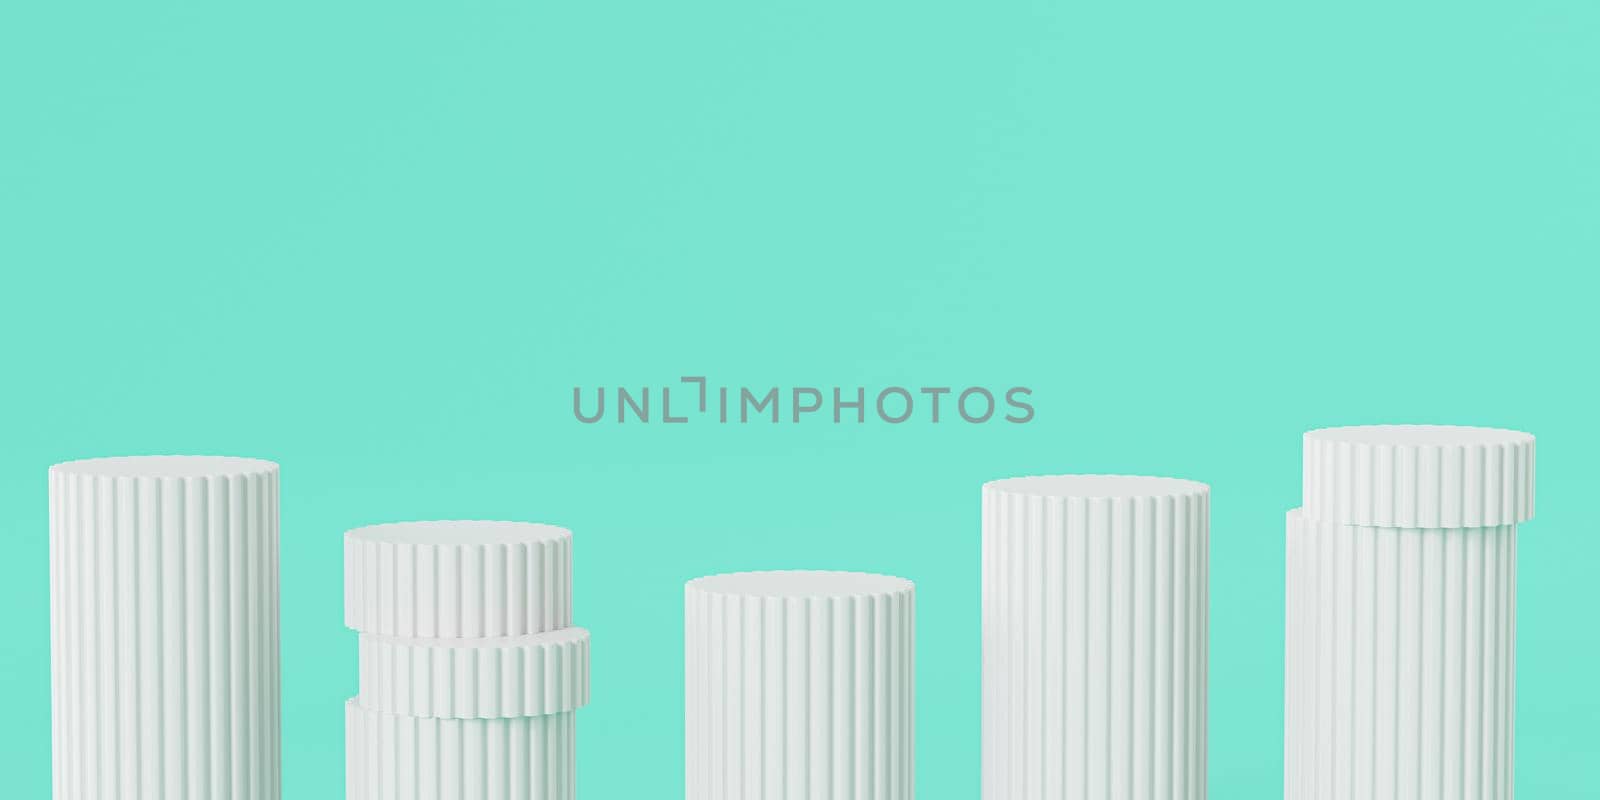 White pillar podiums or pedestals for products or advertising, on turquoise background, minimal 3d illustration render by Frostroomhead